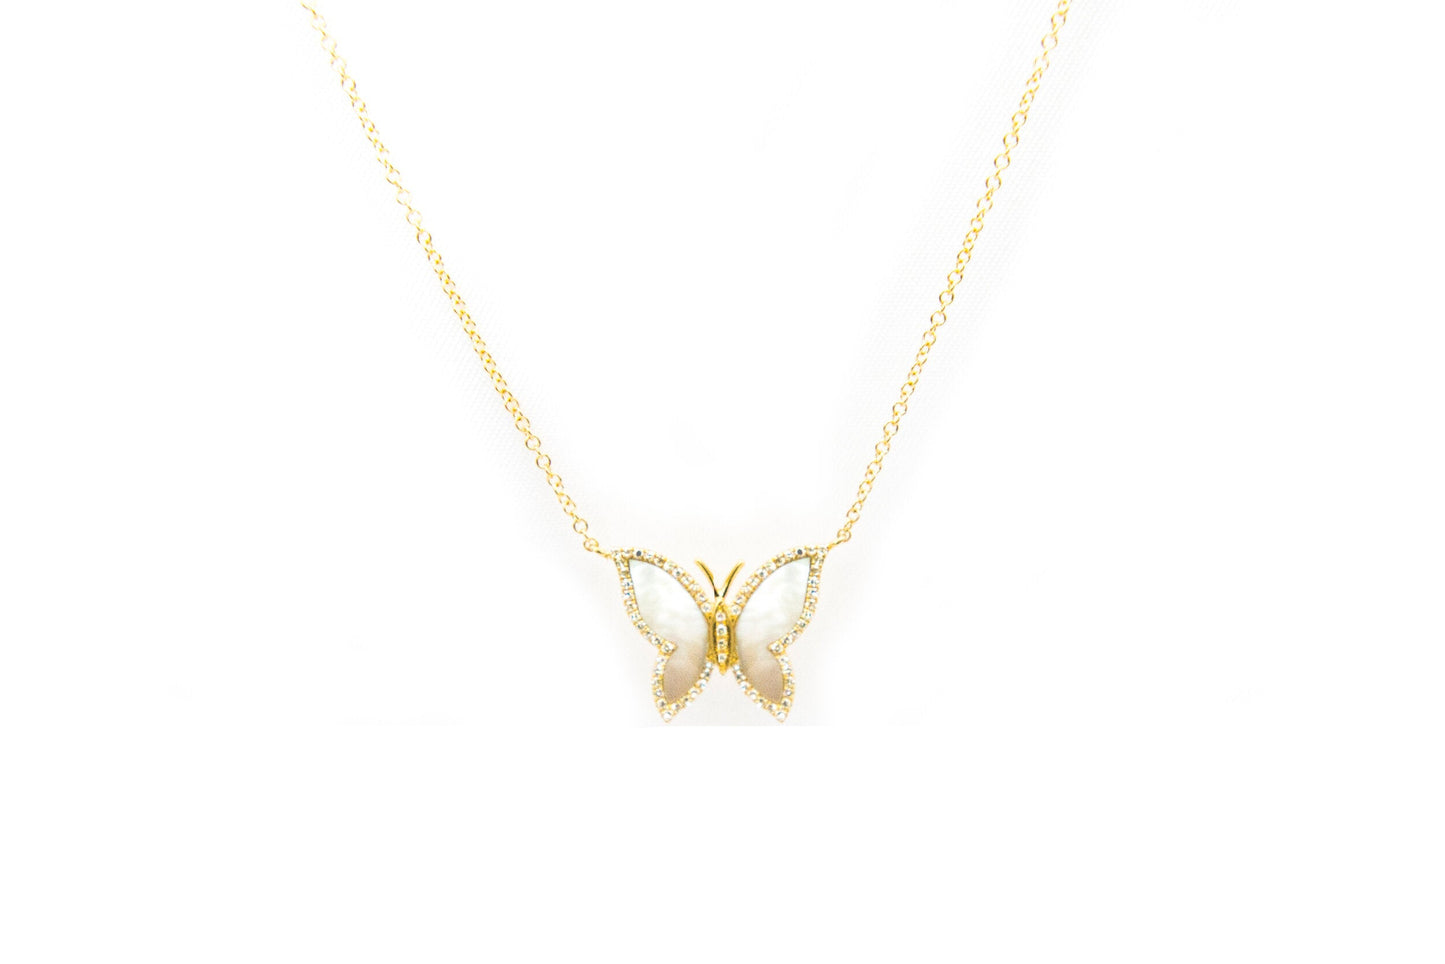 14k Yellow Gold, Mother of Pearl and Diamond Butterfly Necklace